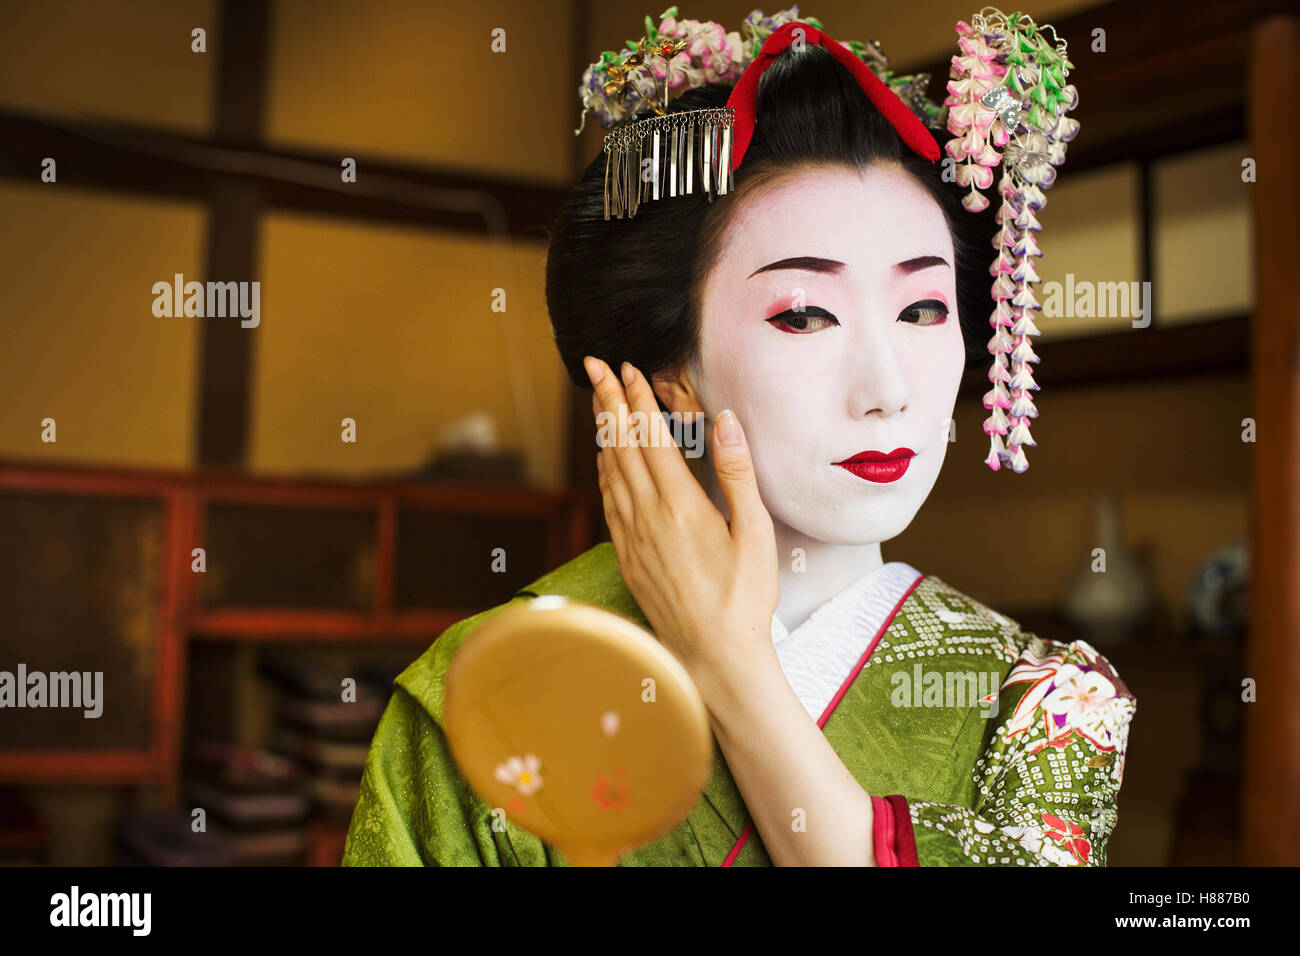 A woman made up in the traditional geisha style, Looking in a hand mirror. Stock Photo